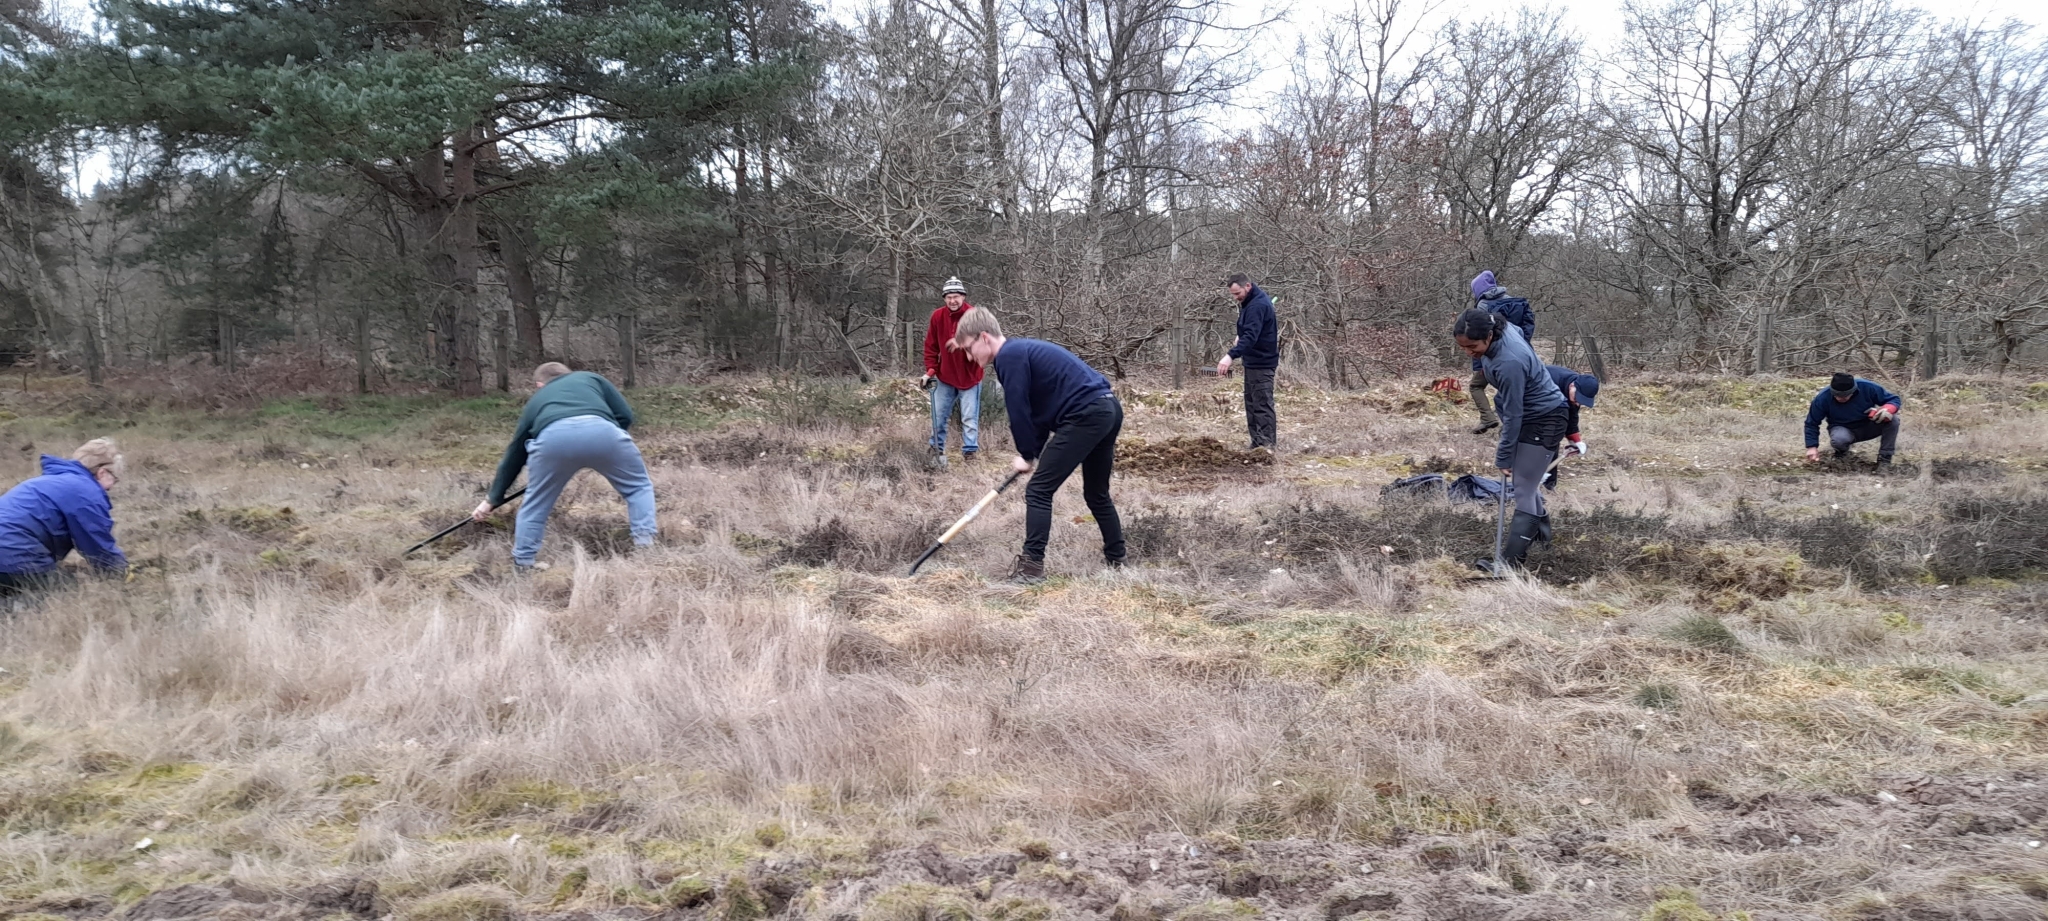 A photo from the FoTF Conservation Event - February 2023 - Turf Removal at Santon Street, Santon Downham : Volunteers work to remove turf from the work area